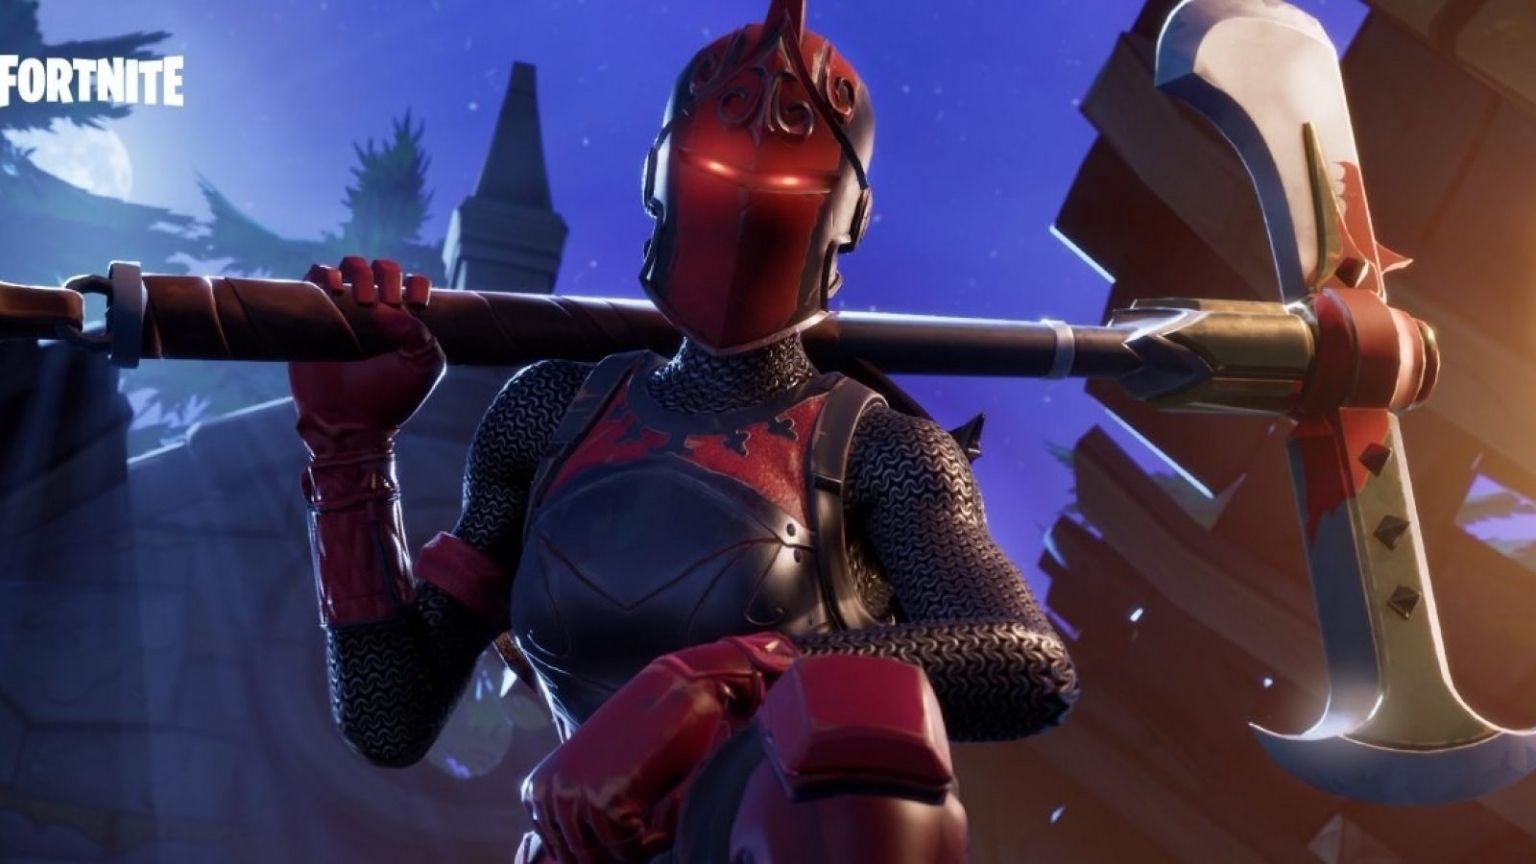 Free download Fortnite to Re Release Rare Red Knight Skin in Item